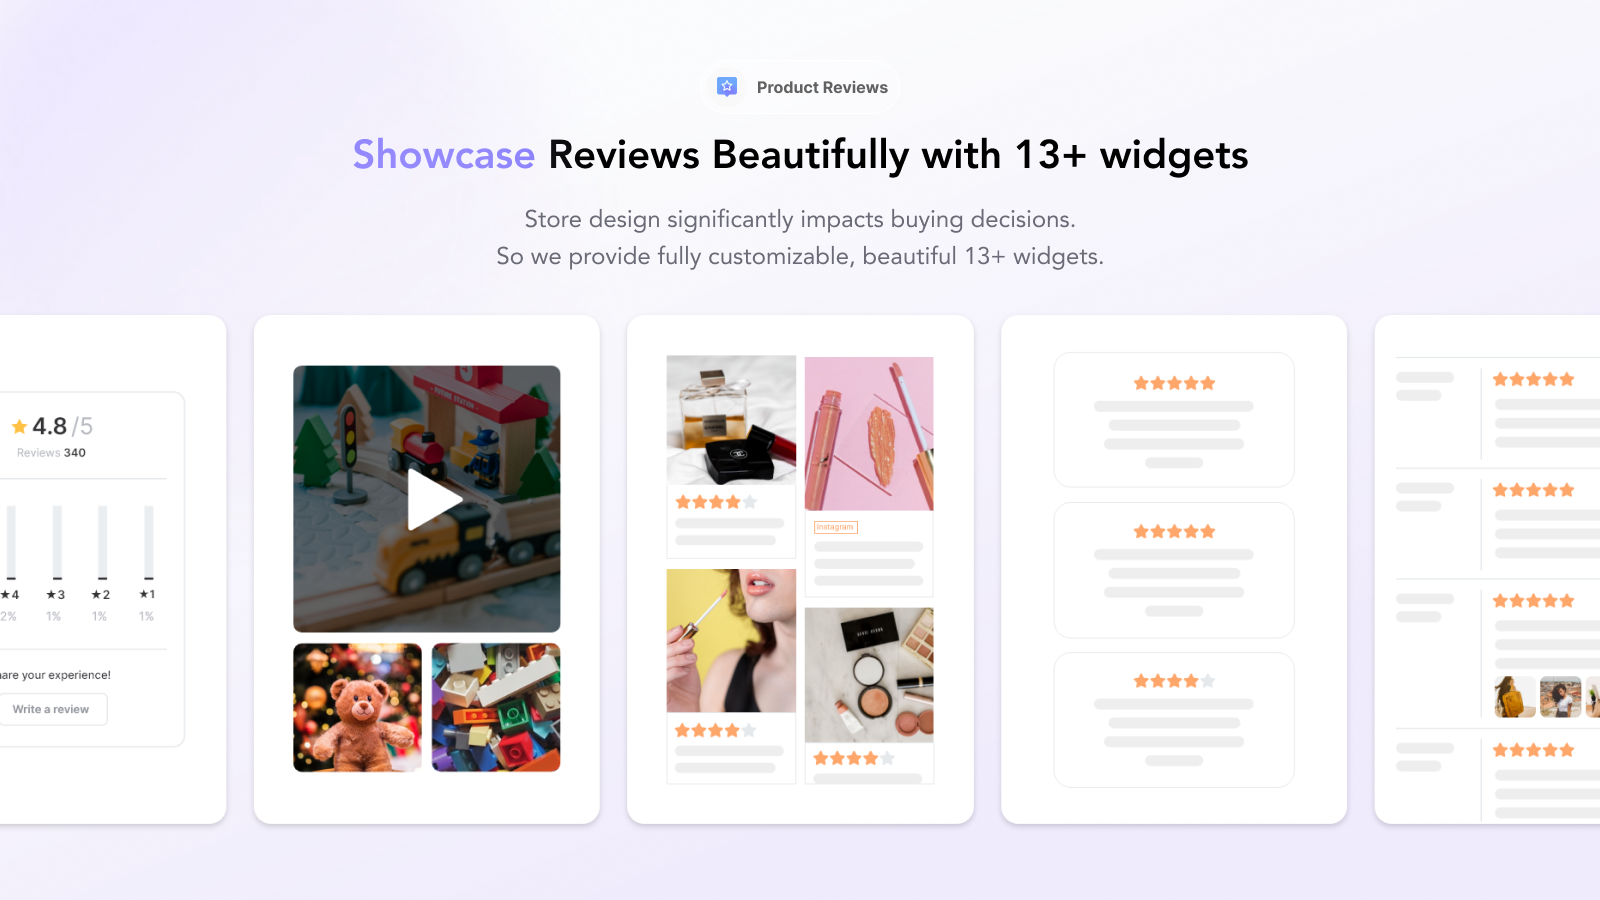 Showcase Reviews Beautifully with 13+ widgets